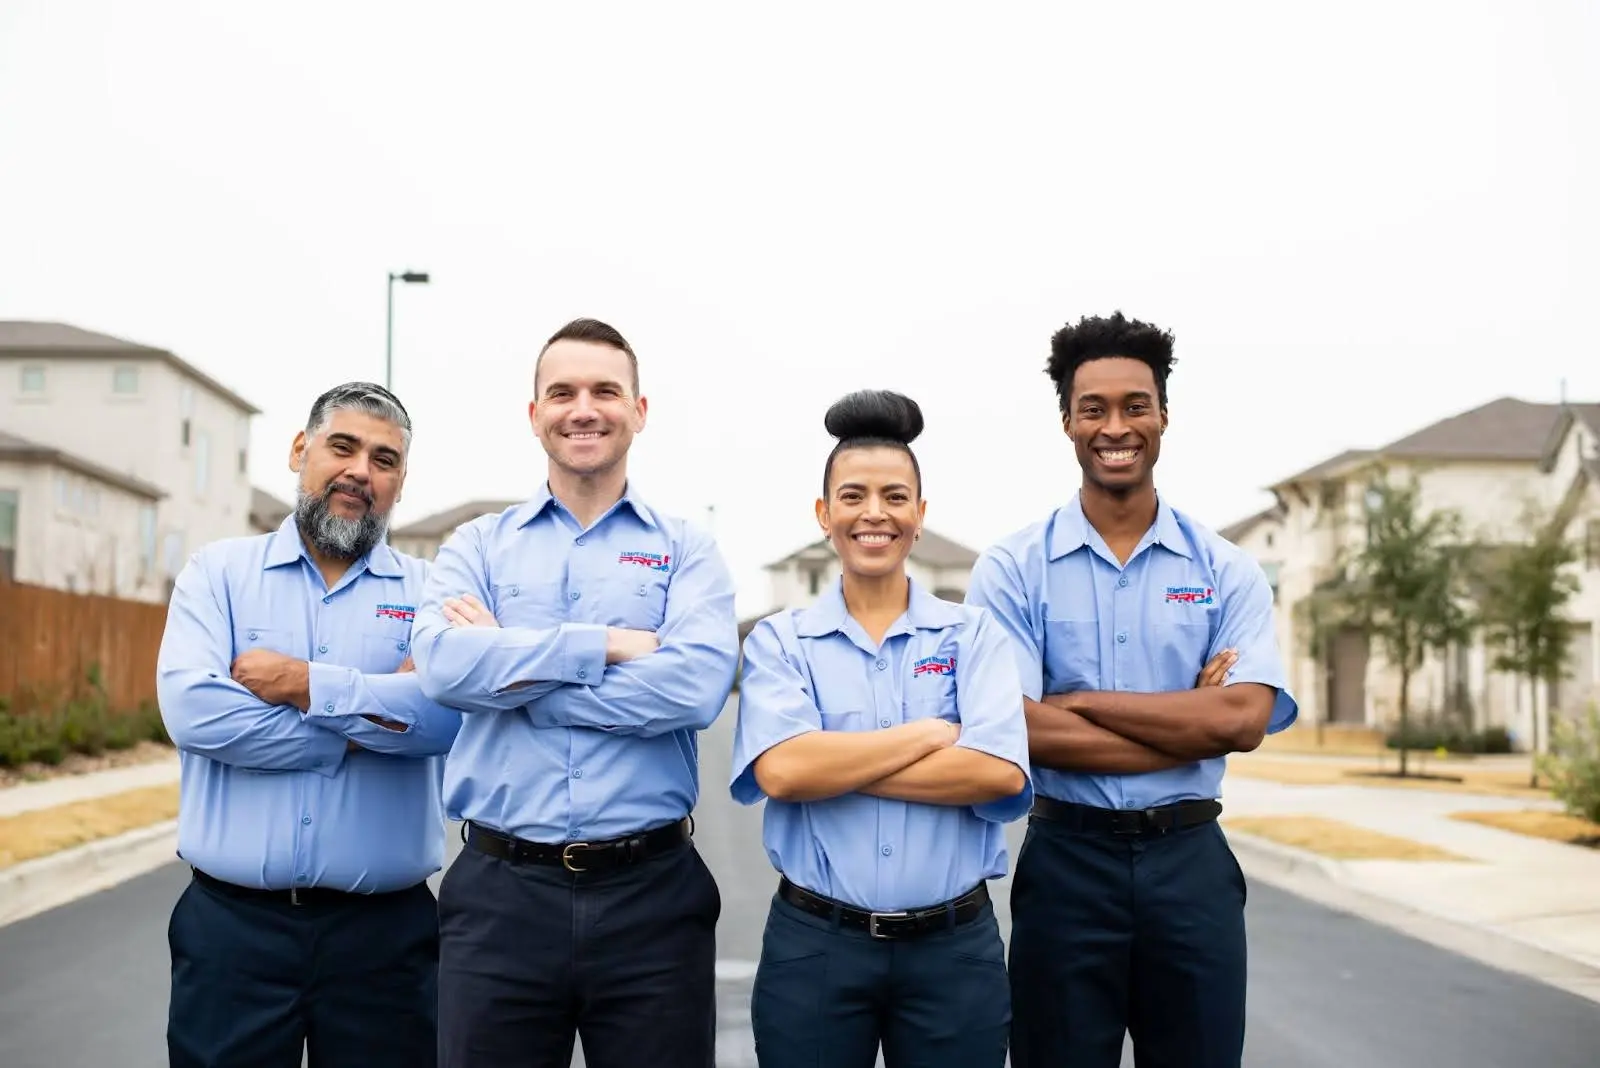 AC technicians from TemperaturePro Orlando standing street with arms crossed.